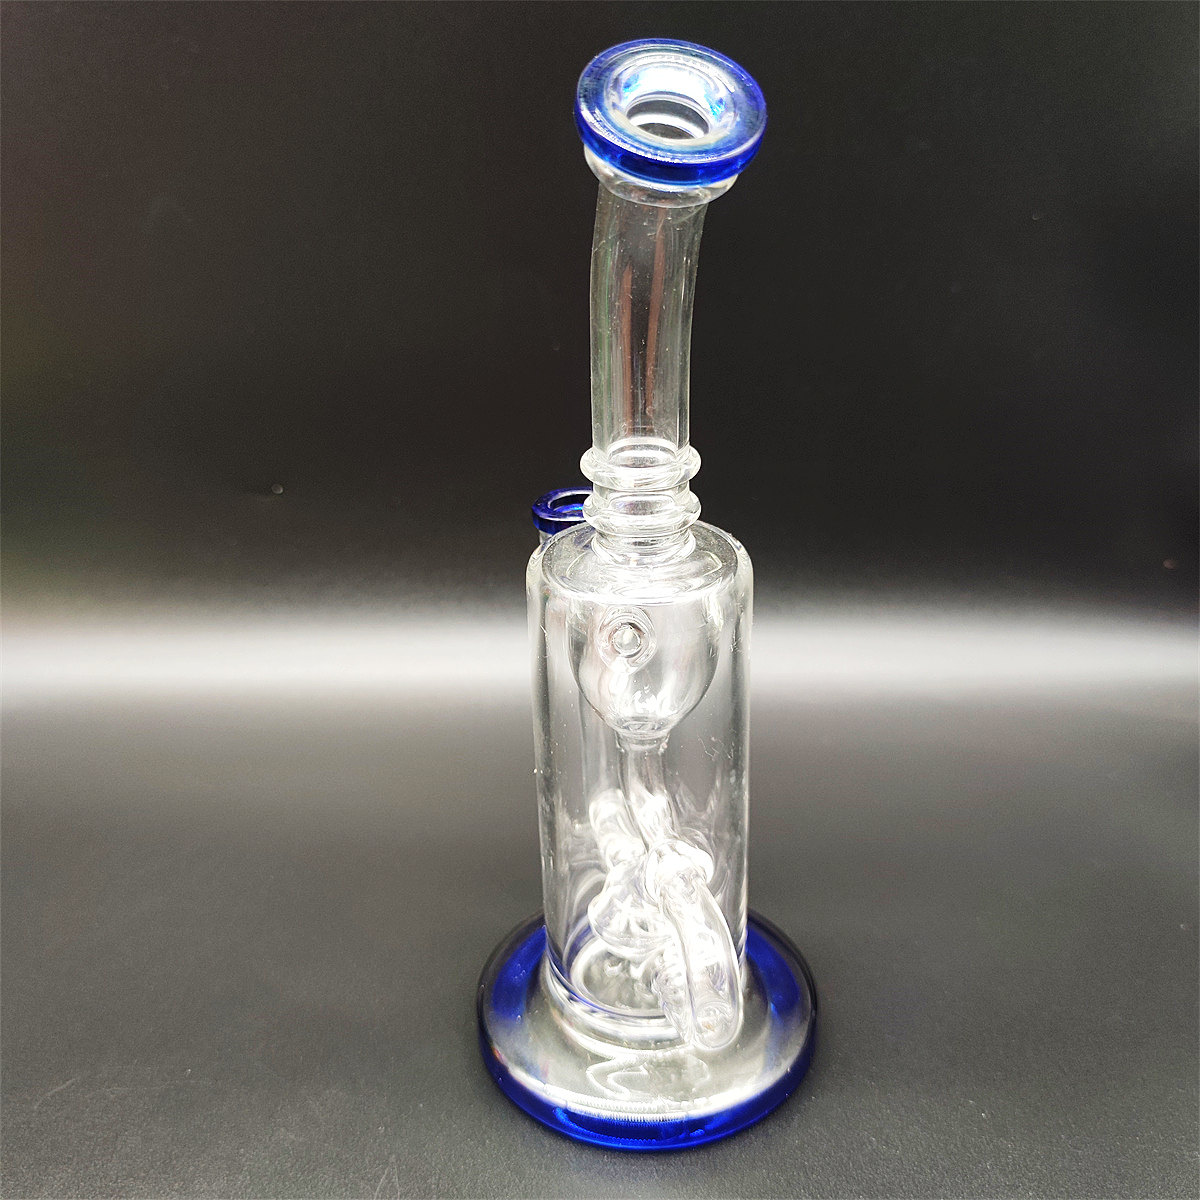 2022 Twin Chamber Fab Egg Slit Hub Heady Bog thicnk Clear Blue 10 Inch Hookah Glass Bong Dabber Rig Recycler Incycler Smoke Pipe Puck 14,4mm Joint Perc